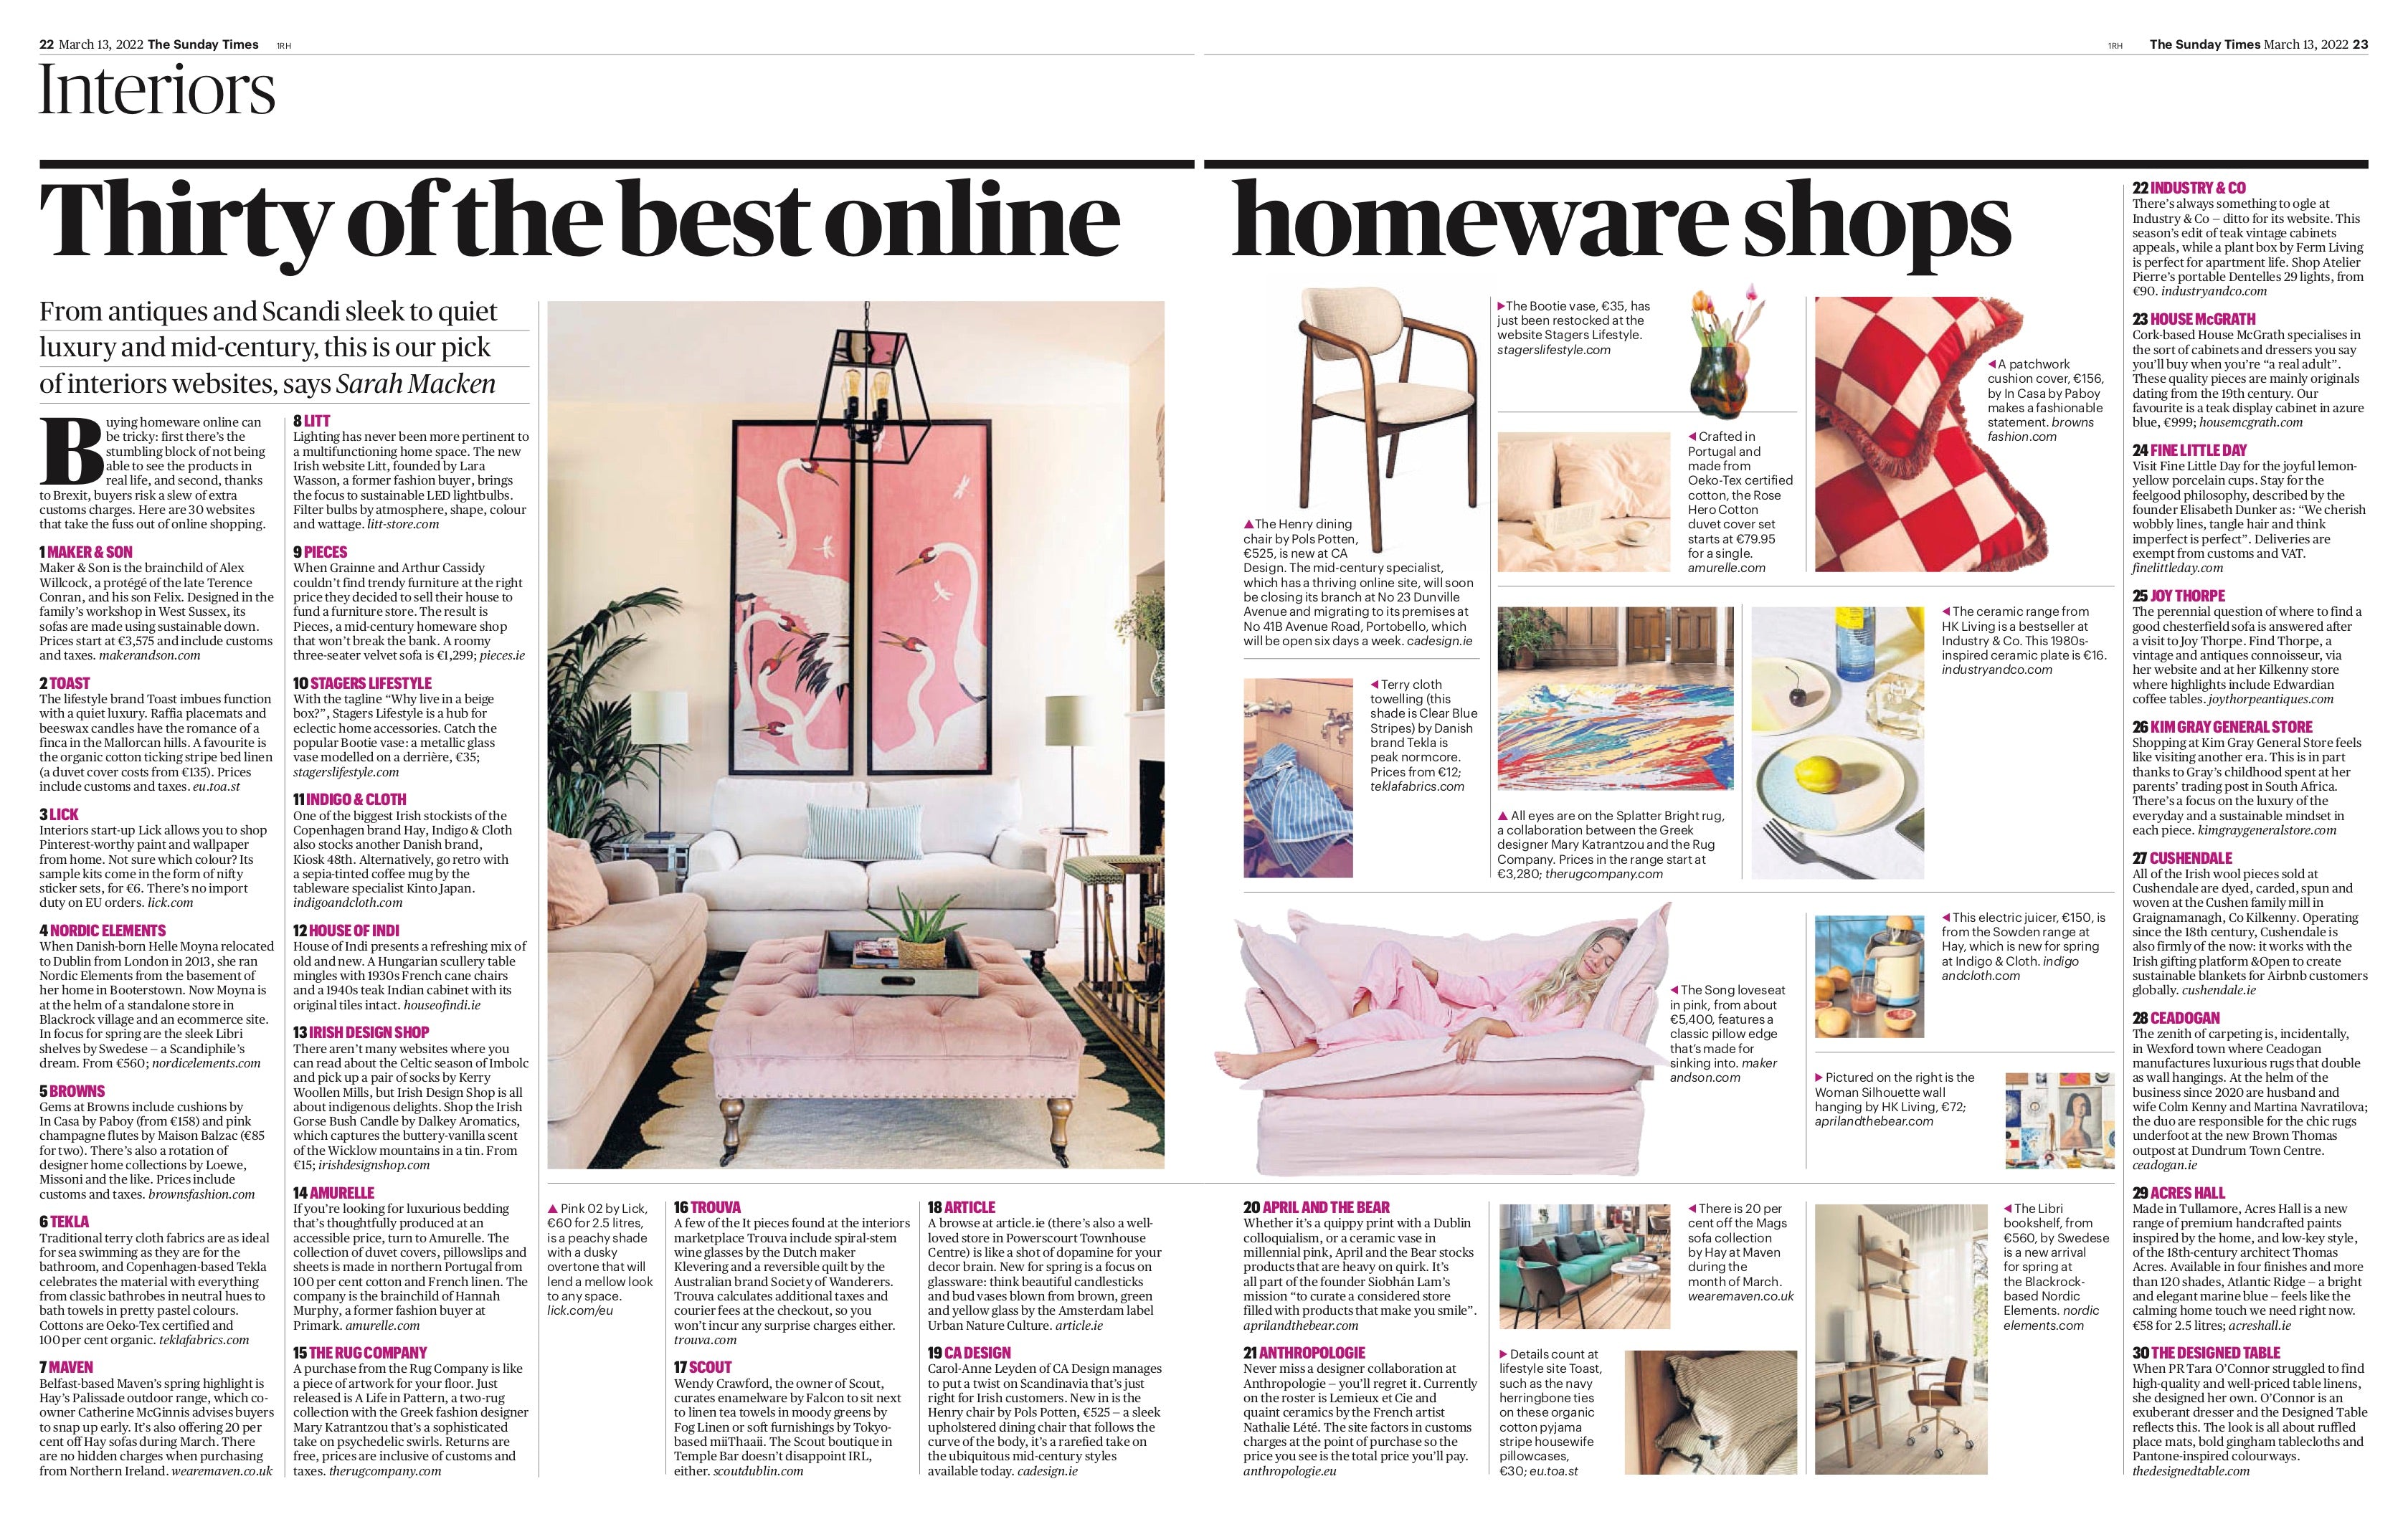 Thirty of the best online homeware shops - Sunday Times 13 March